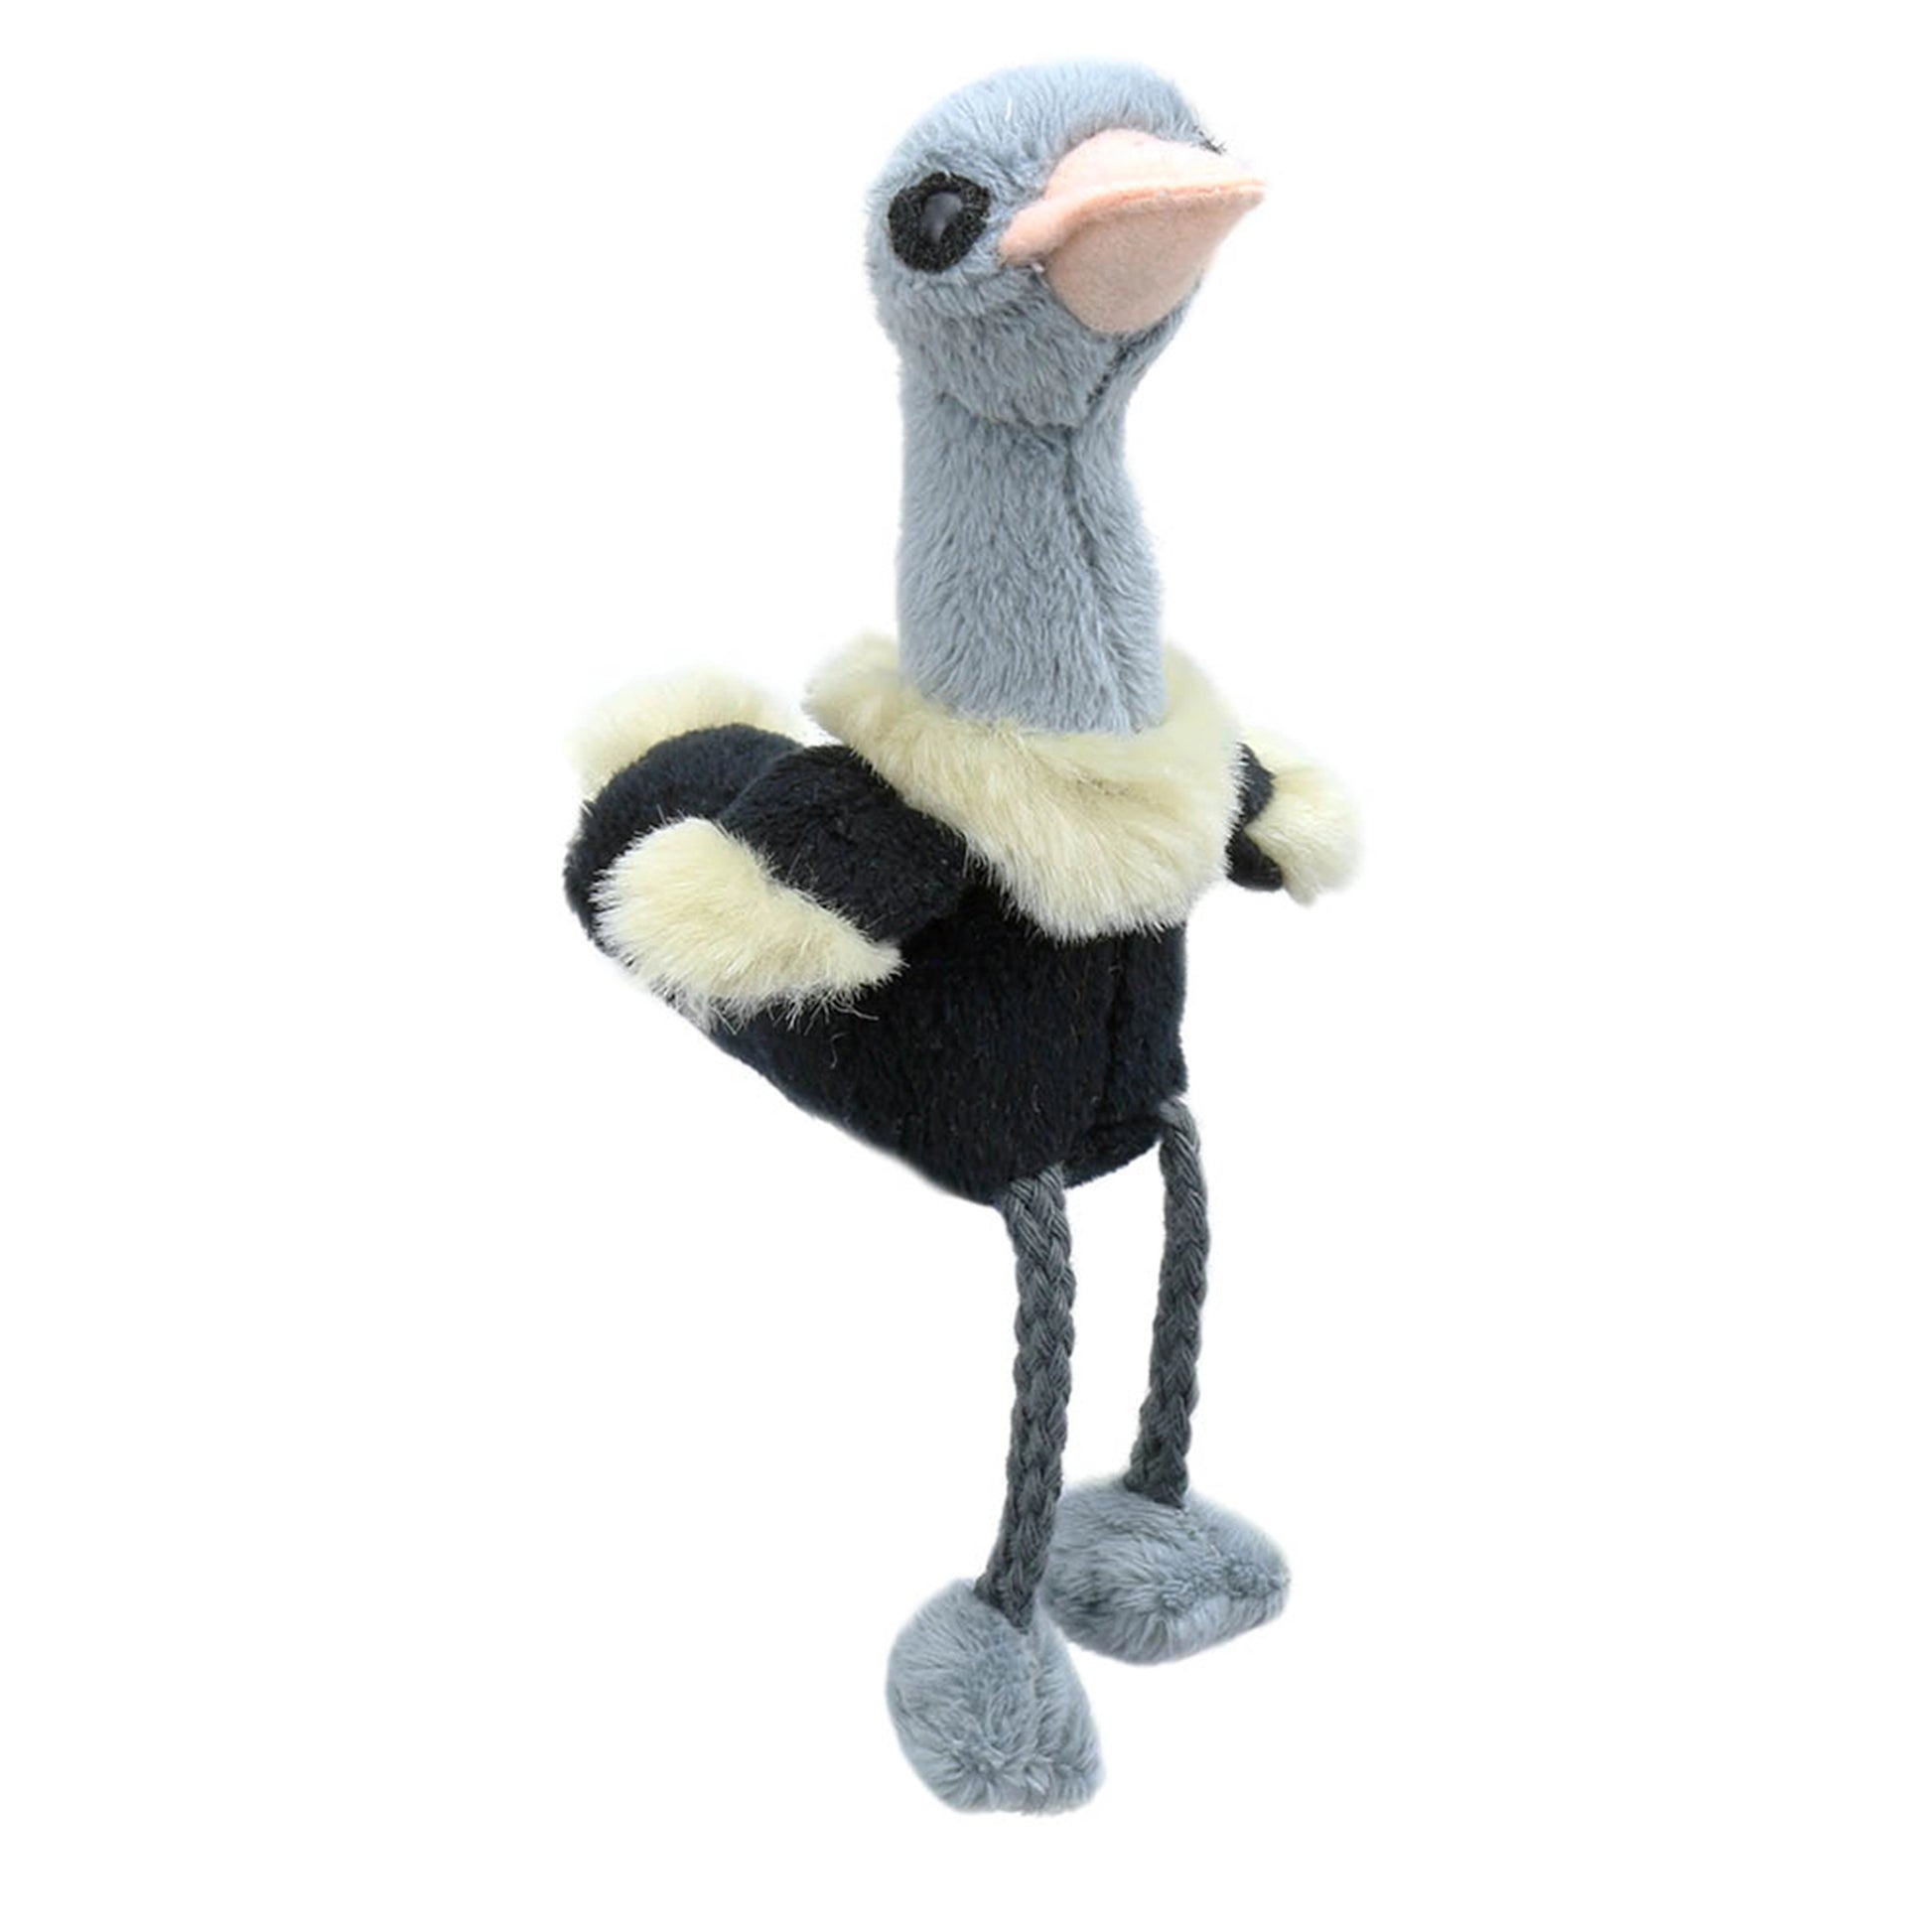 Ostritch Finger Puppet - The Puppet Company - The Forgotten Toy Shop